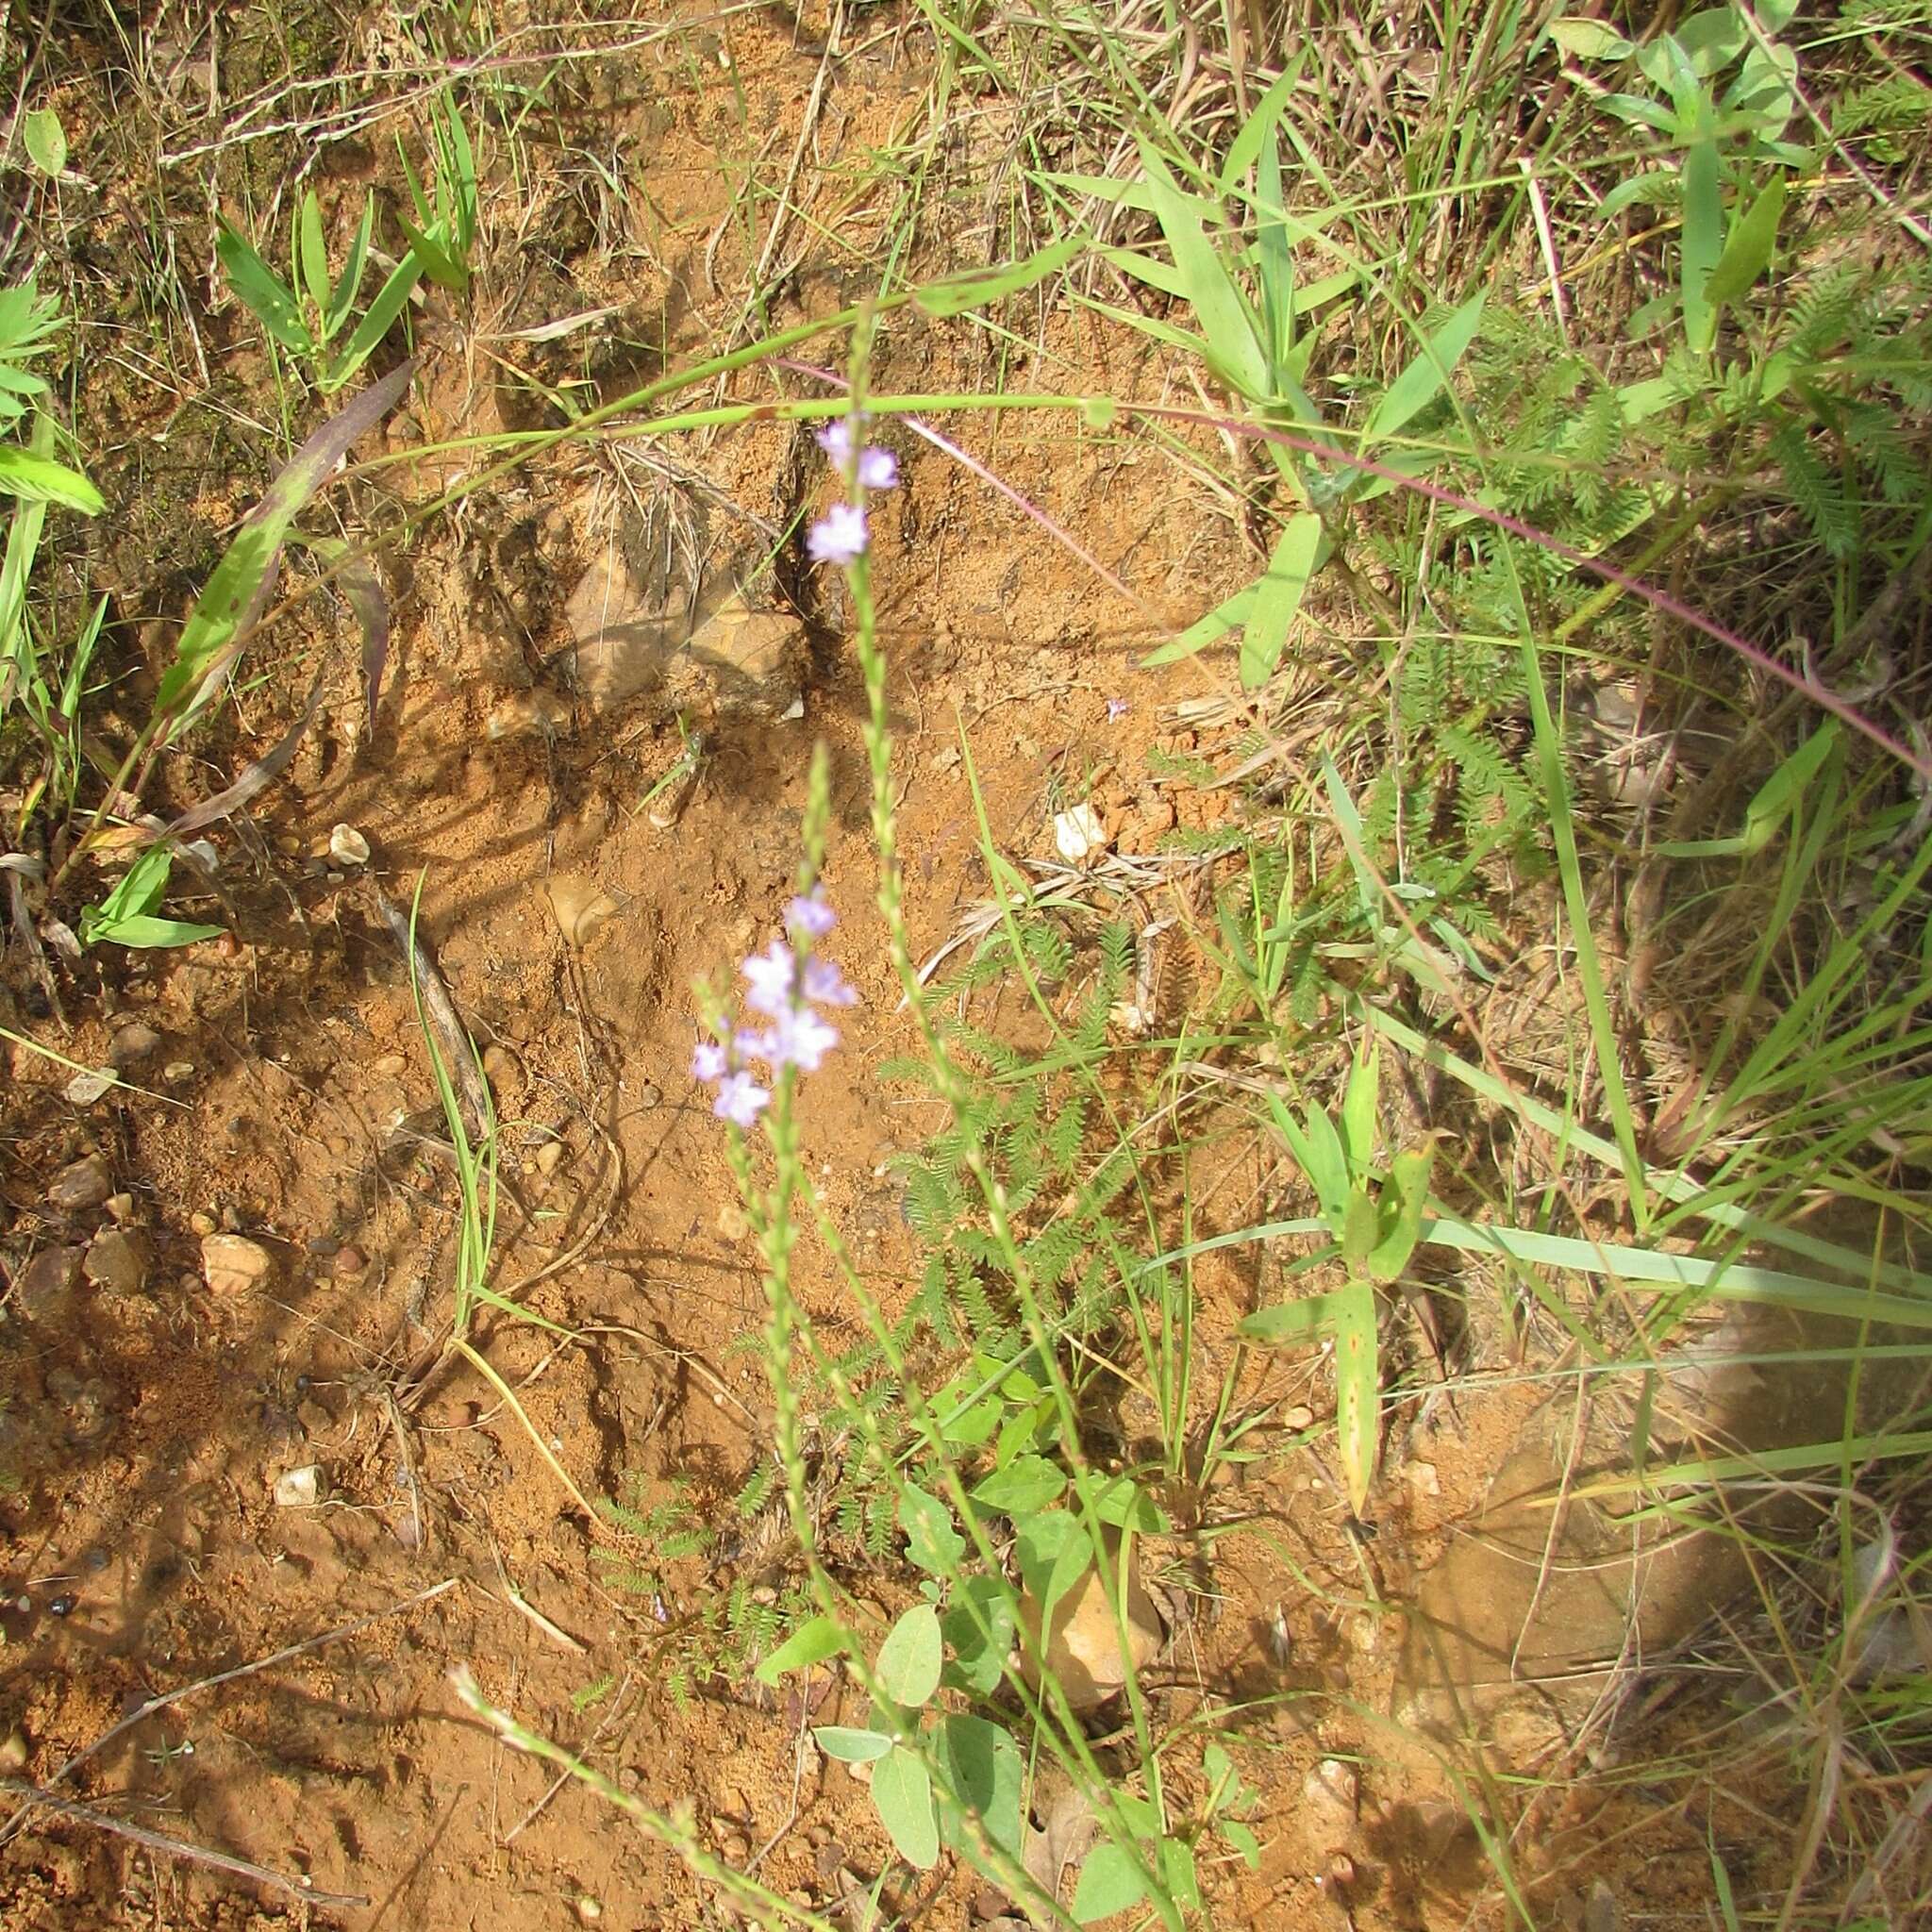 Image of Texas vervain